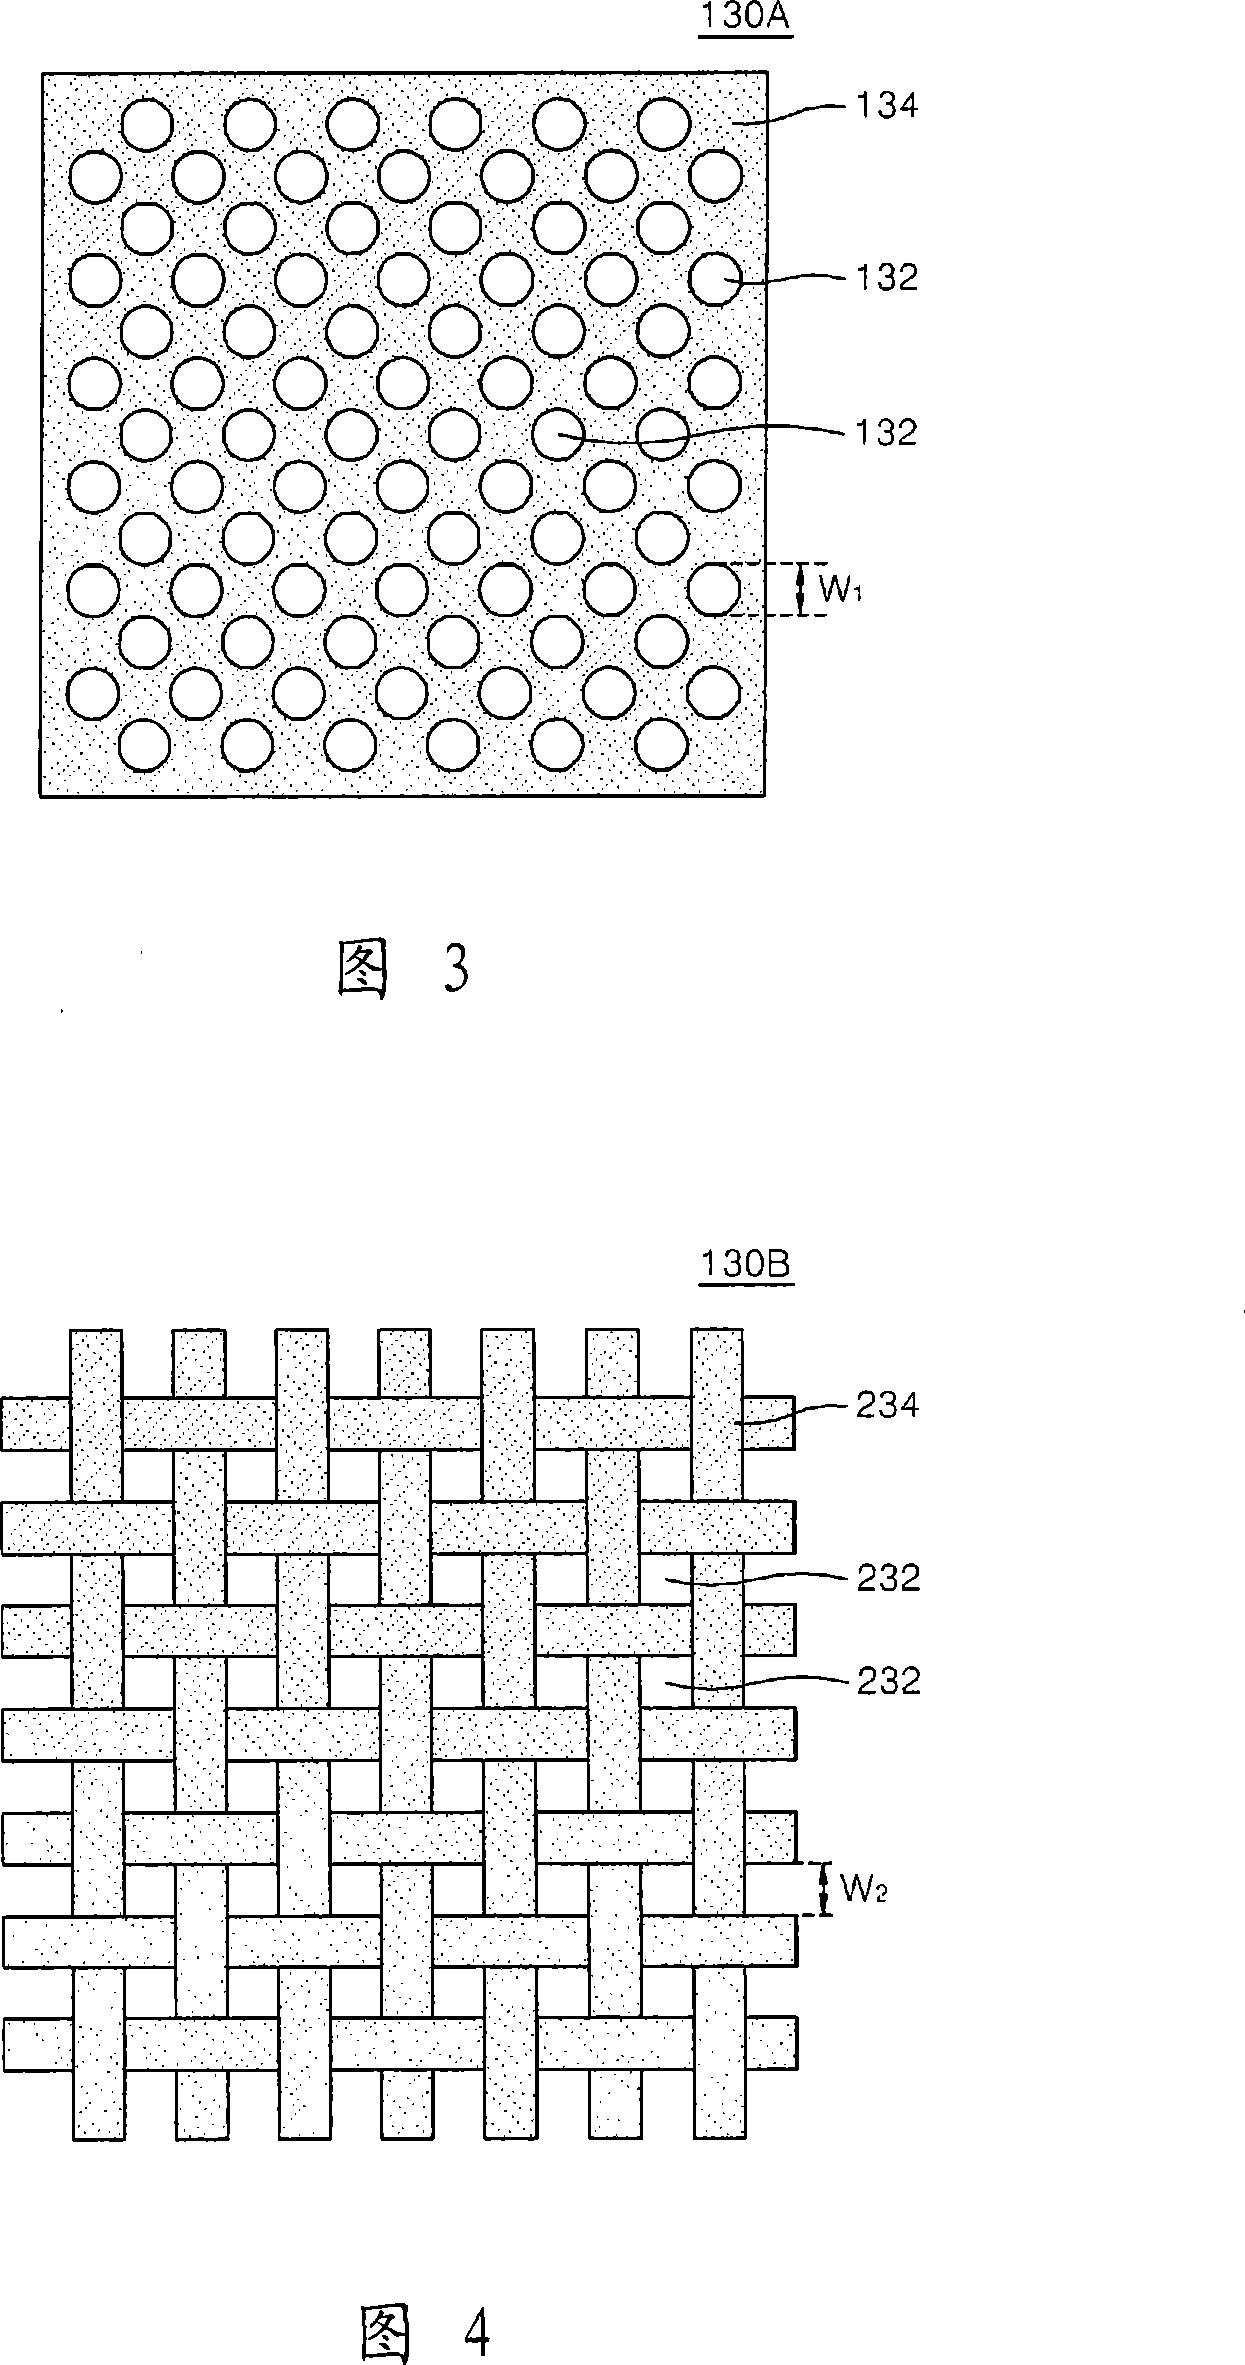 Aqeuous electrolyte composition and sealed-type primary film battery including electrolyte layer formed of the aqueous electrolyte composition